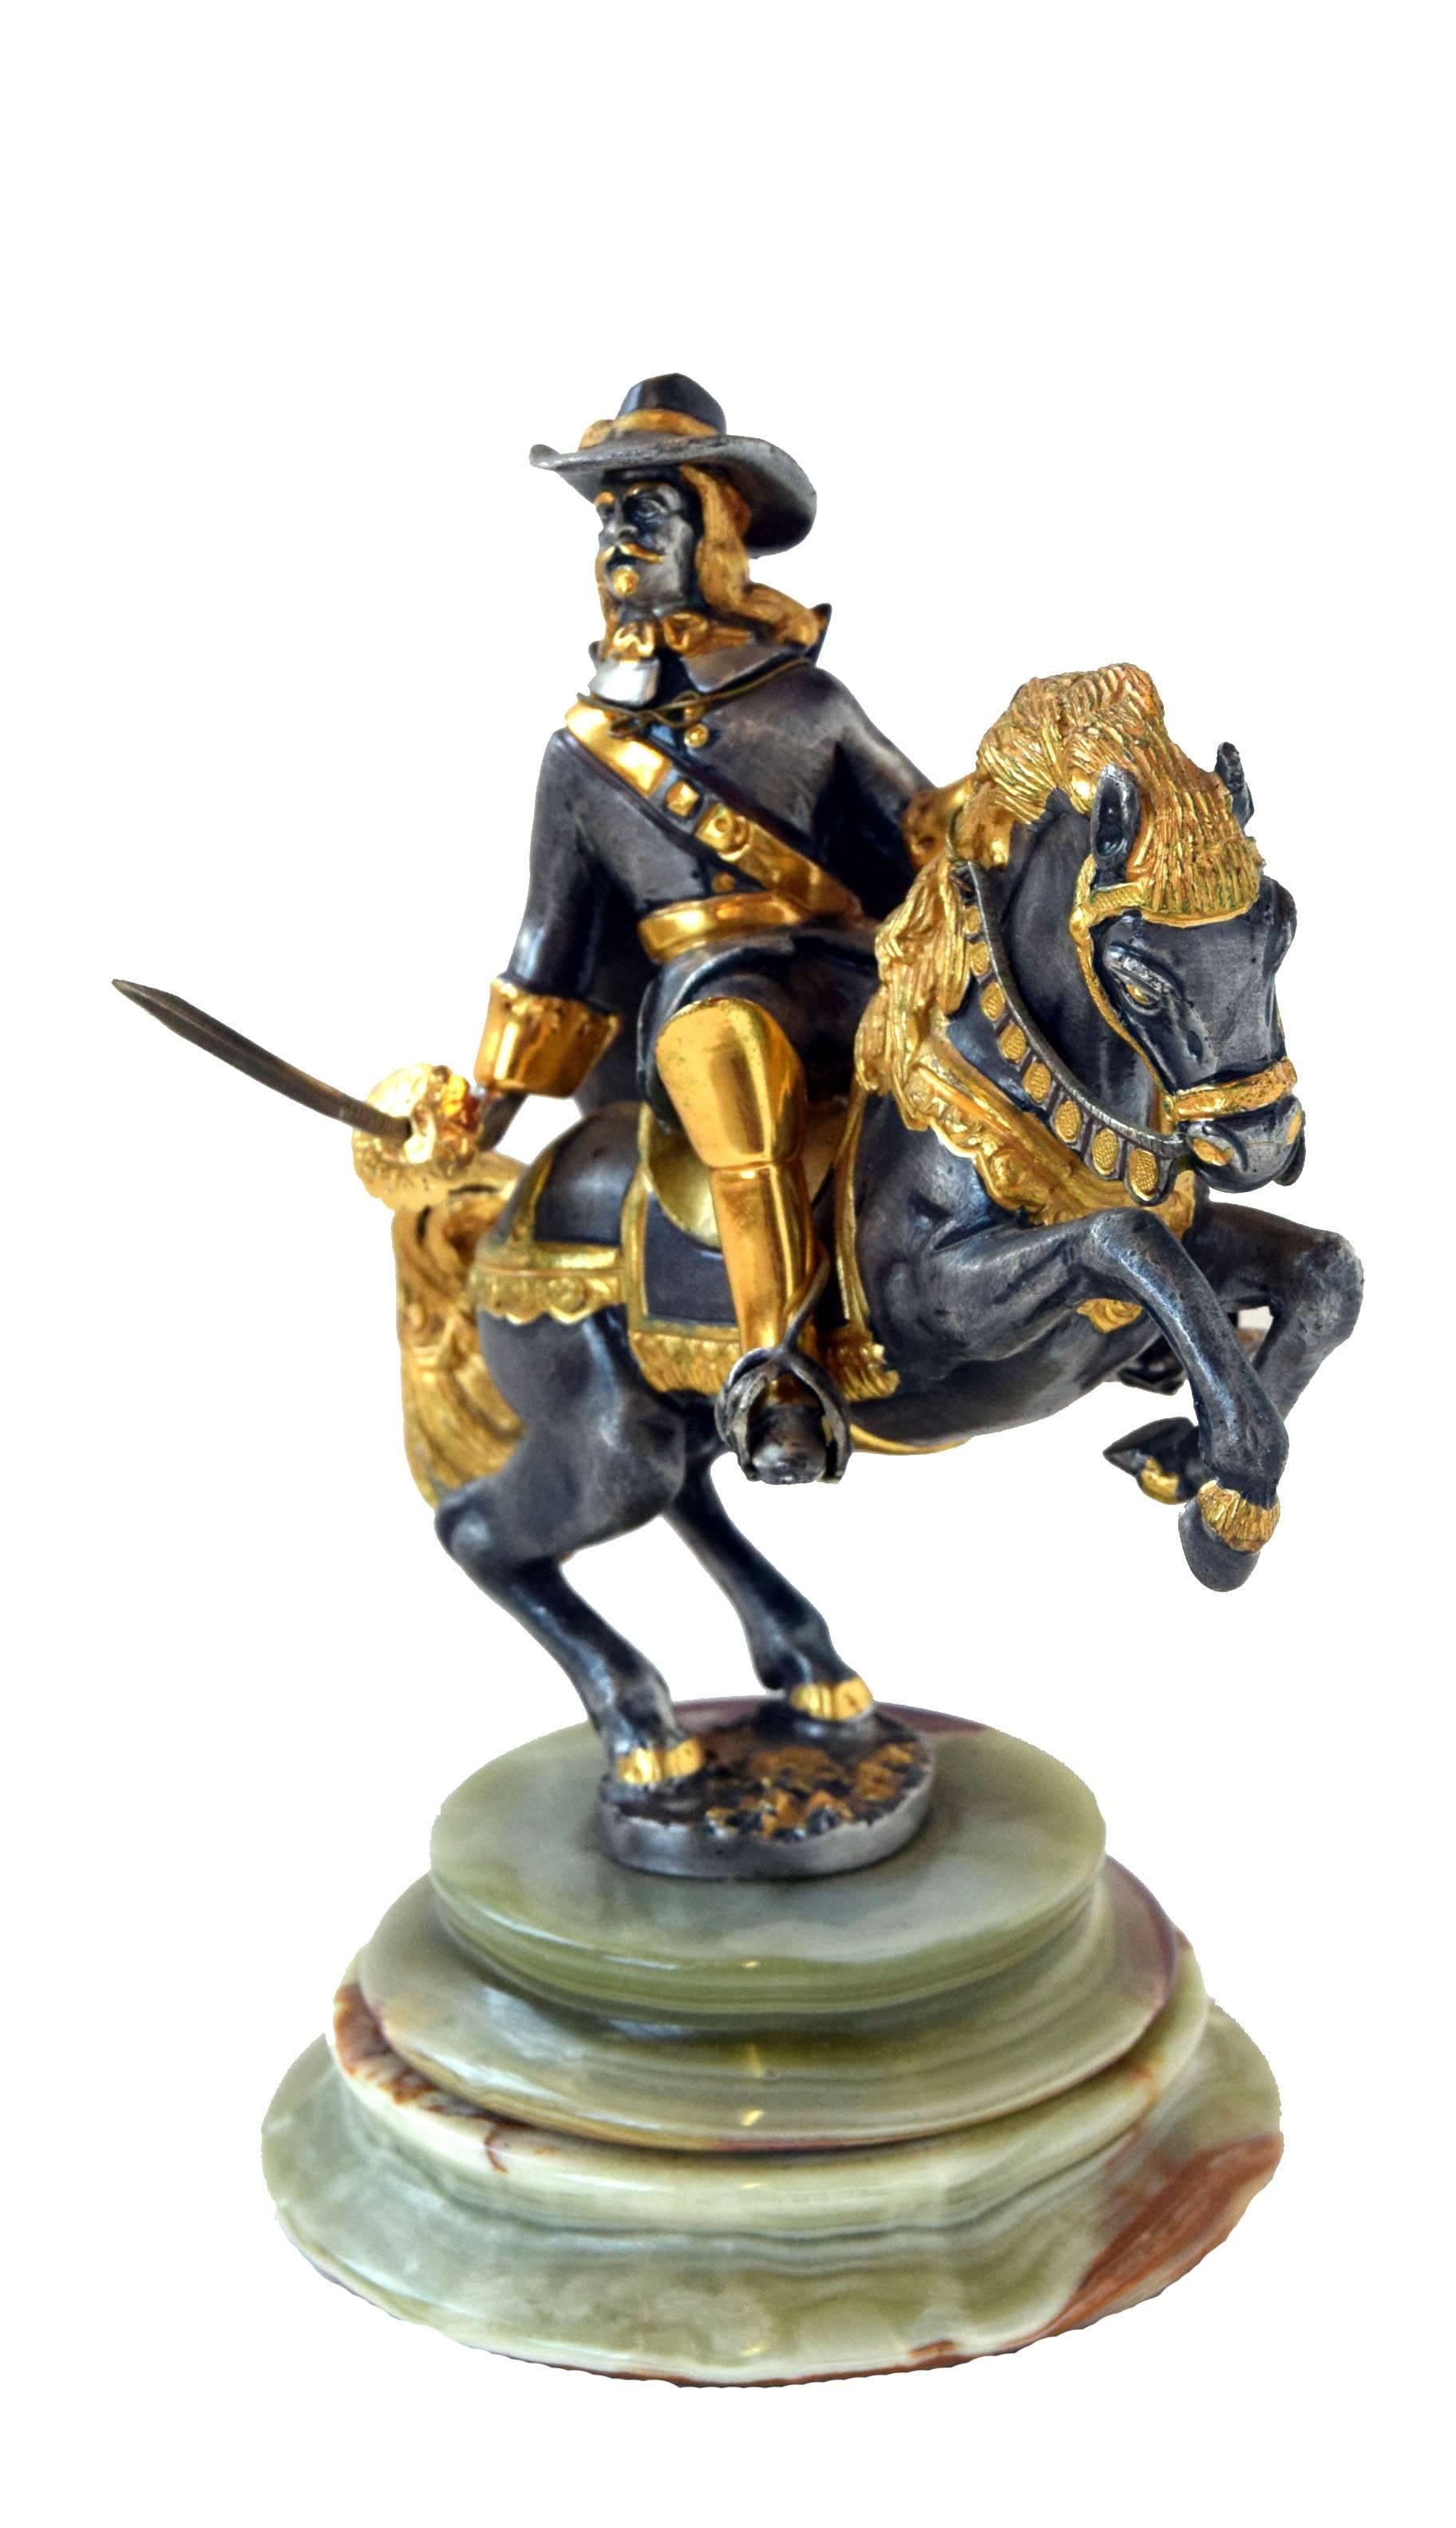 Giuseppe Vasari Hero series horseback Cavalier for Gorham Silver Company - .800 silver over bronze and 22-karat gold gilded figurine - 192/250. Size: 5 inches (12.7 cm). The statue is 8.5